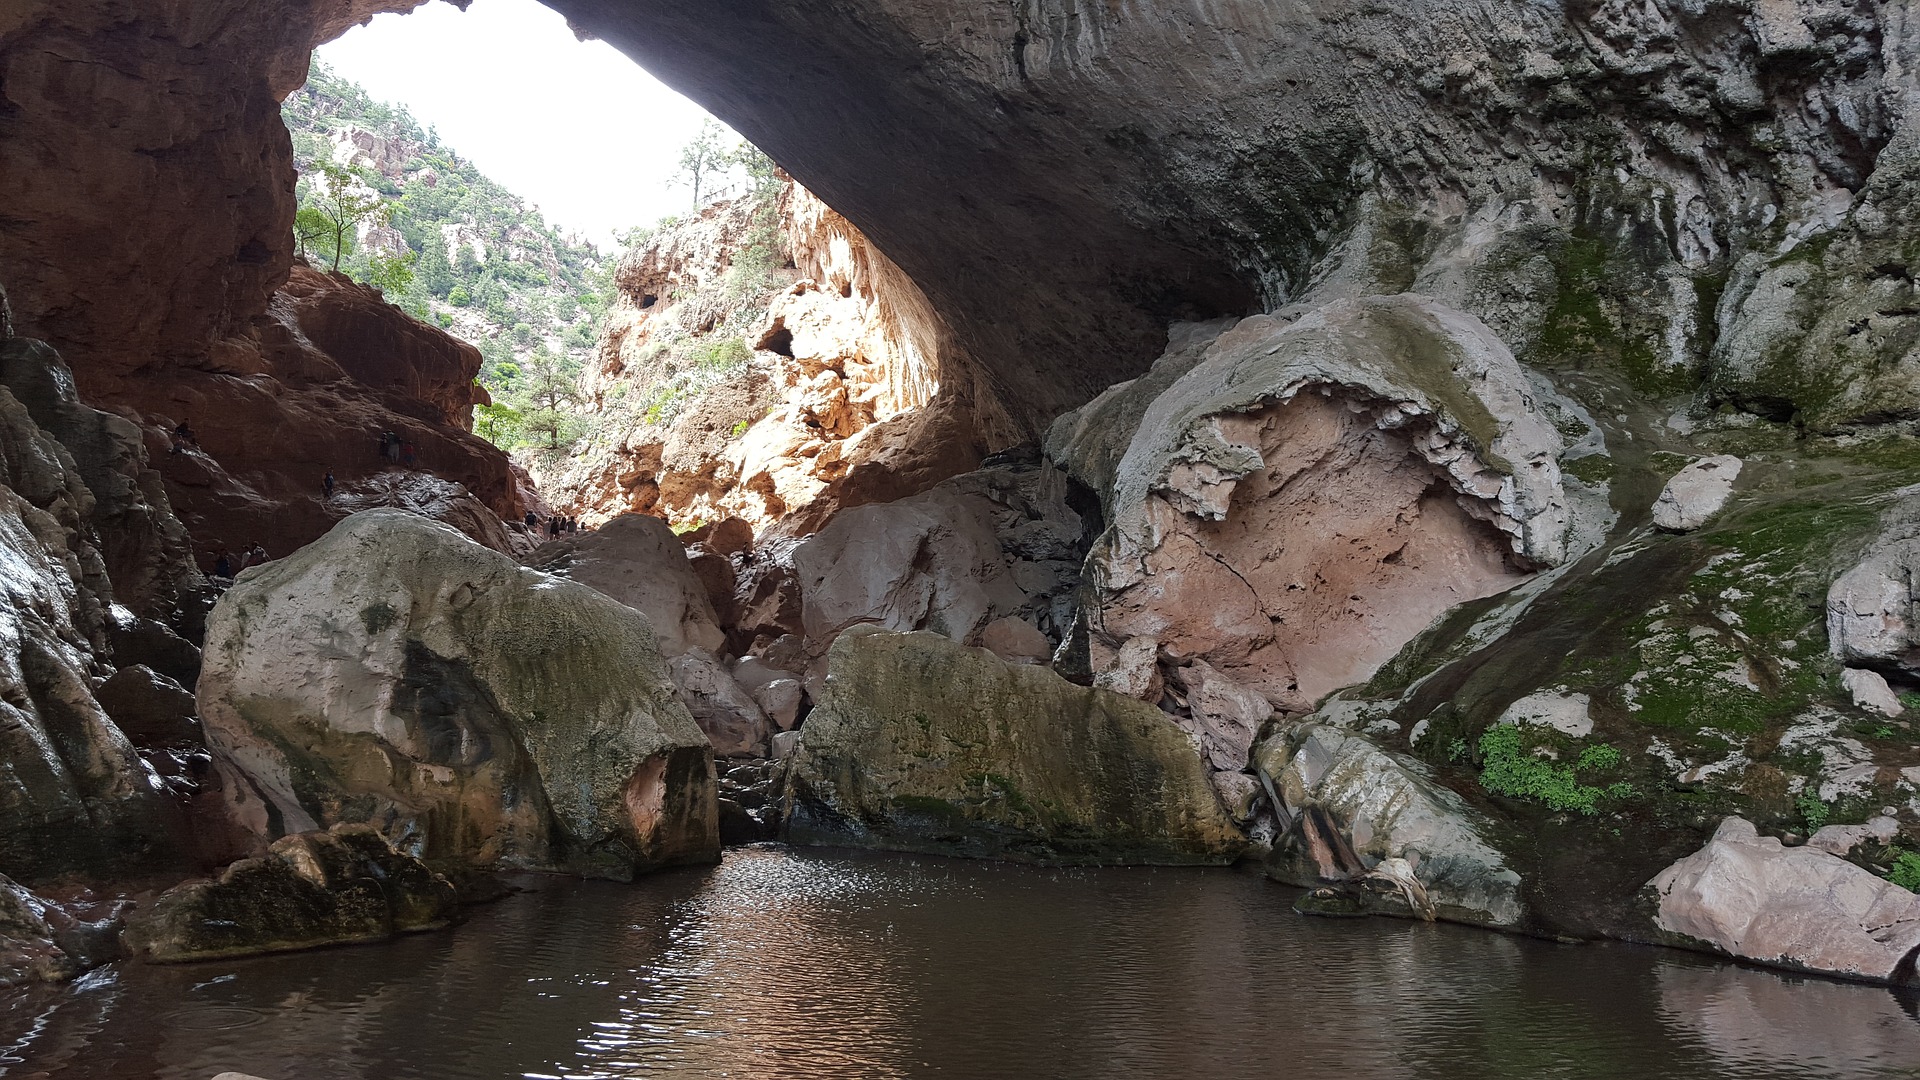 Tonto Bridge Monument, Payson \\ These 7 Arizona Weekend Road Trips are a great way to get away a day or two and see everything that Arizona has to offer!